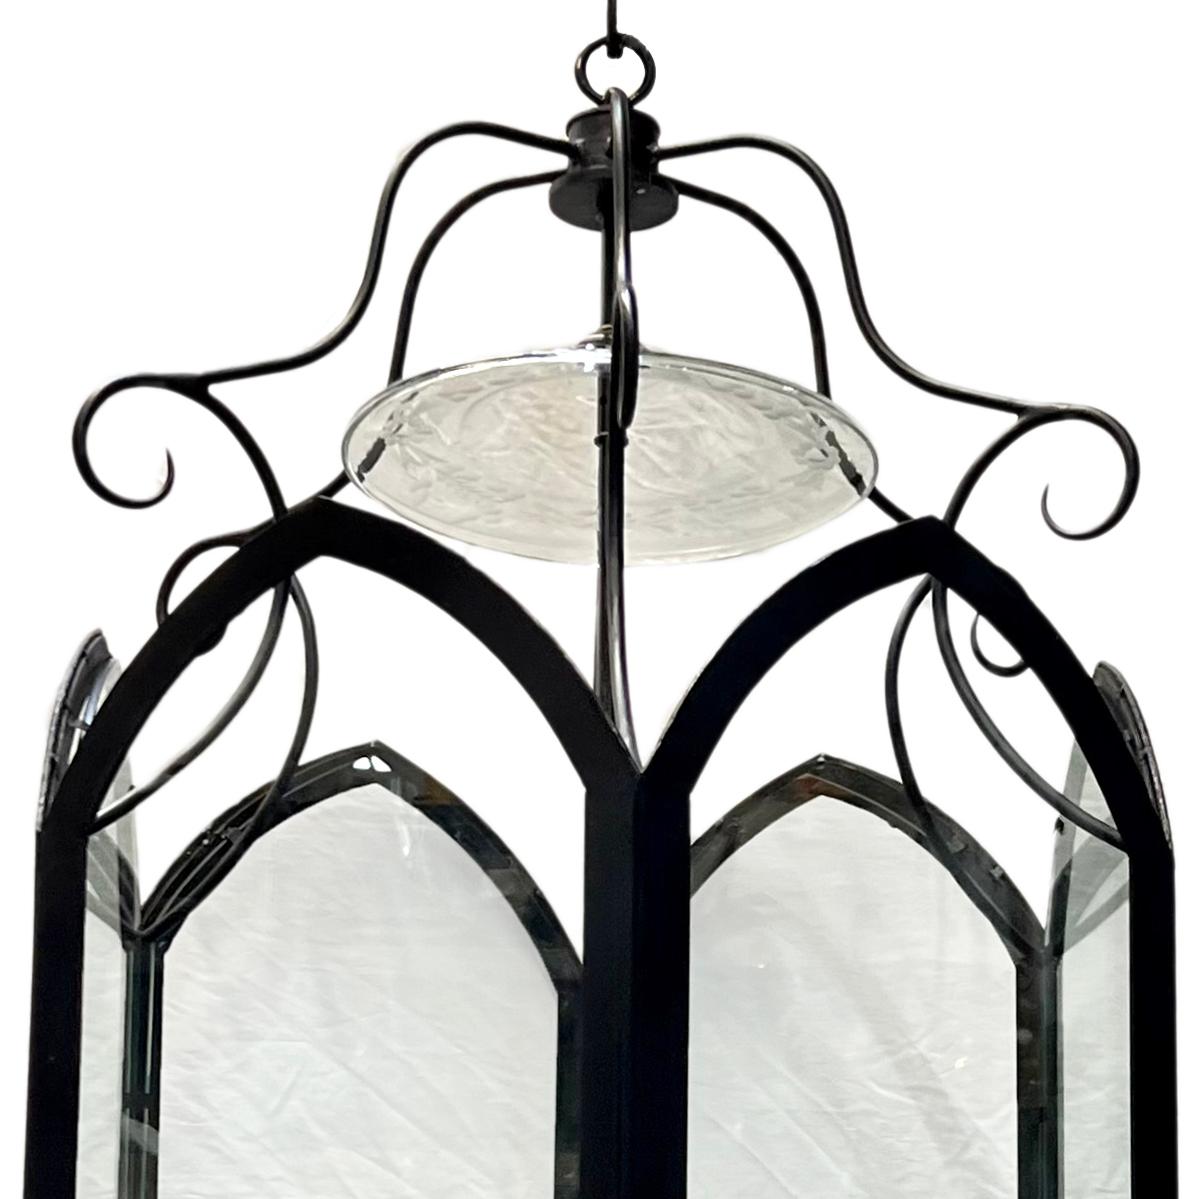 A French circa 1950's wrought iron lantern with glass insets and 6 interior candelabra lights.

Measurements:
Diameter: 25